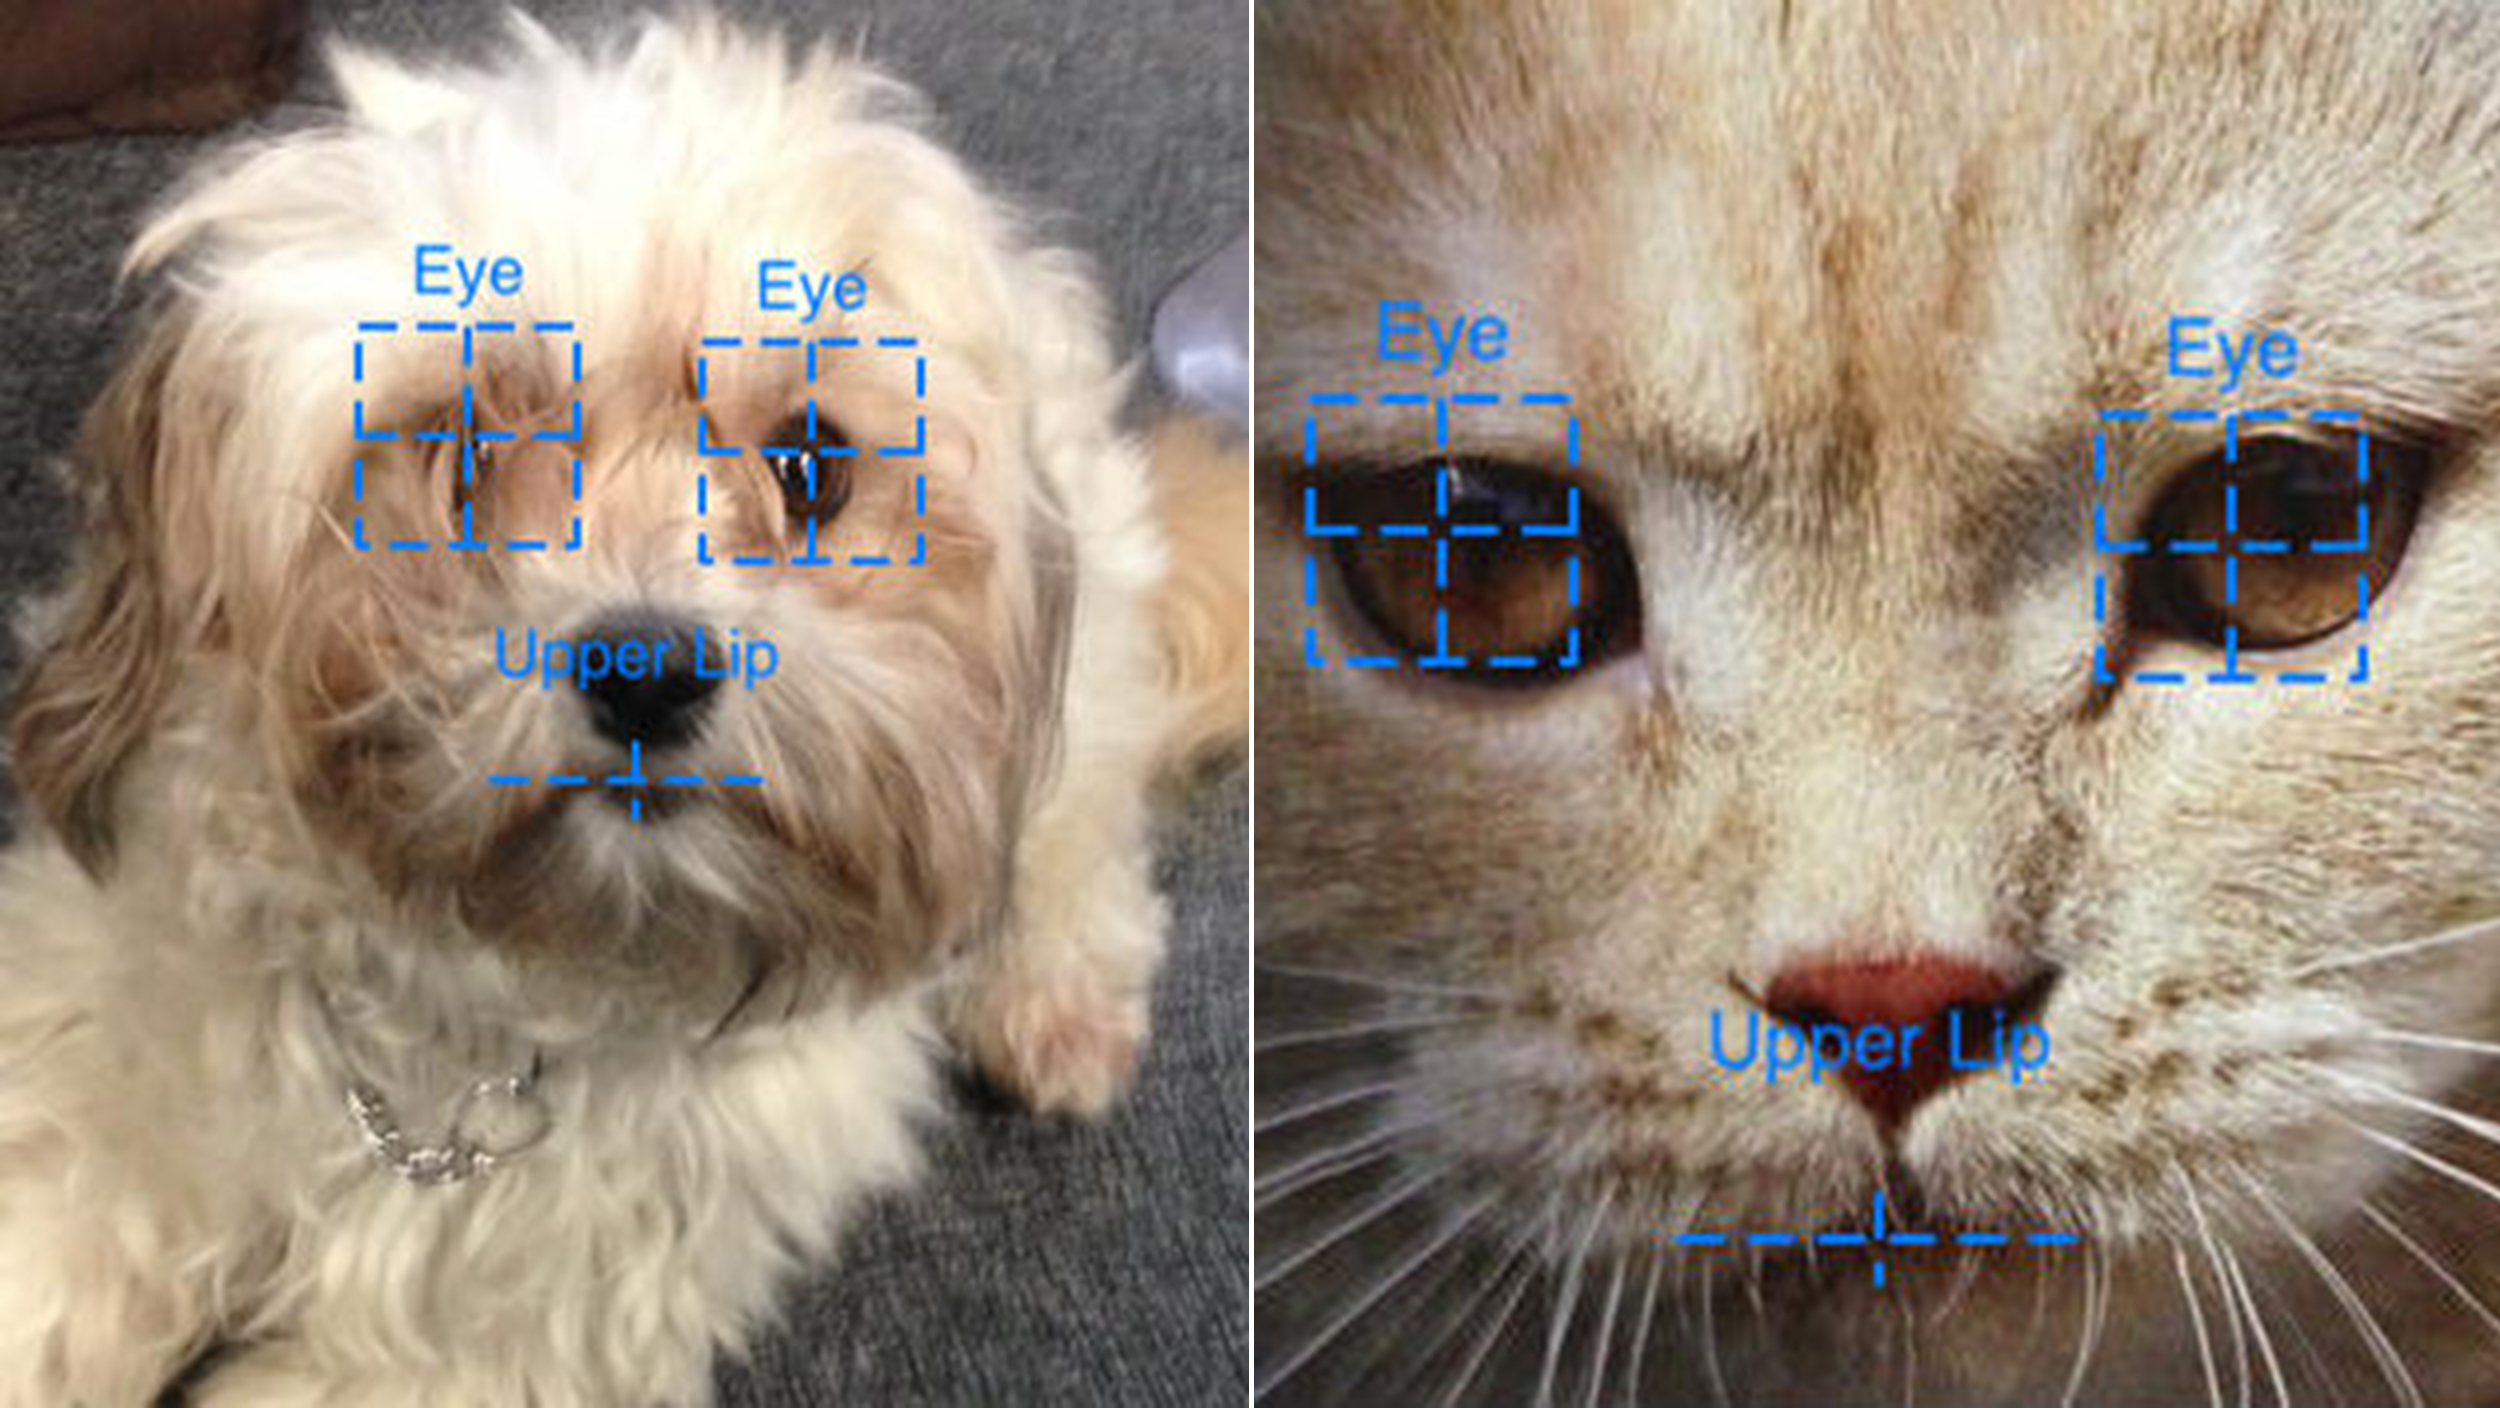 Lost and found: App uses facial recognition technology to find missing pets